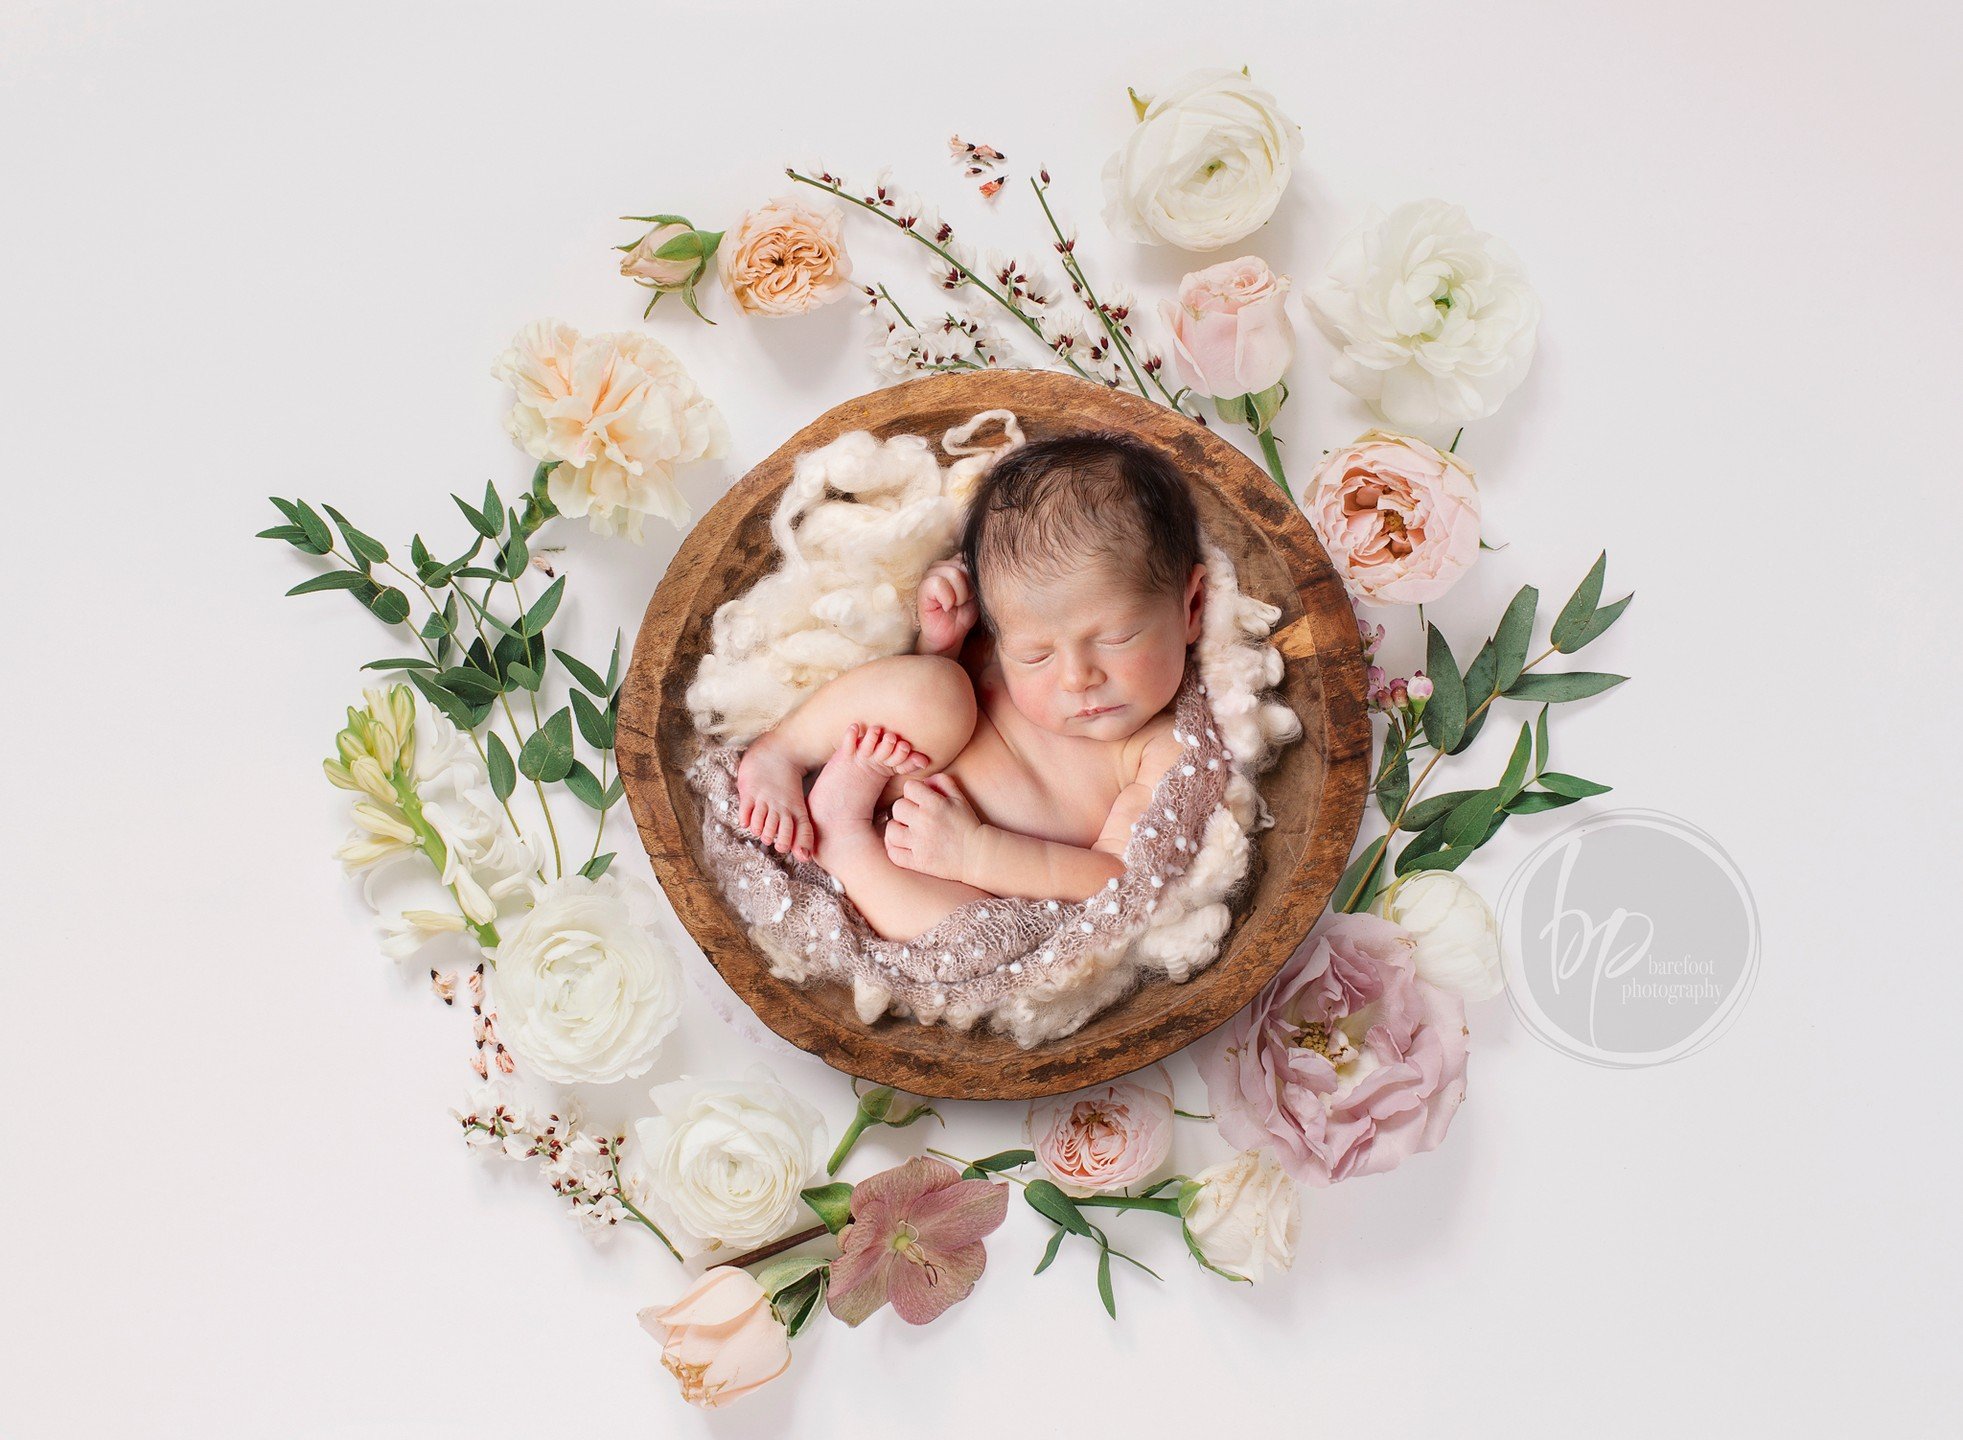 Amelia 🌸 
All the pretties for this beauty 

#sutherlandshirenewbornphotographer&nbsp;#barefootphotography&nbsp;#kareenaprivatehospital&nbsp;#newbornhospitalphotography&nbsp;#newbornphotography